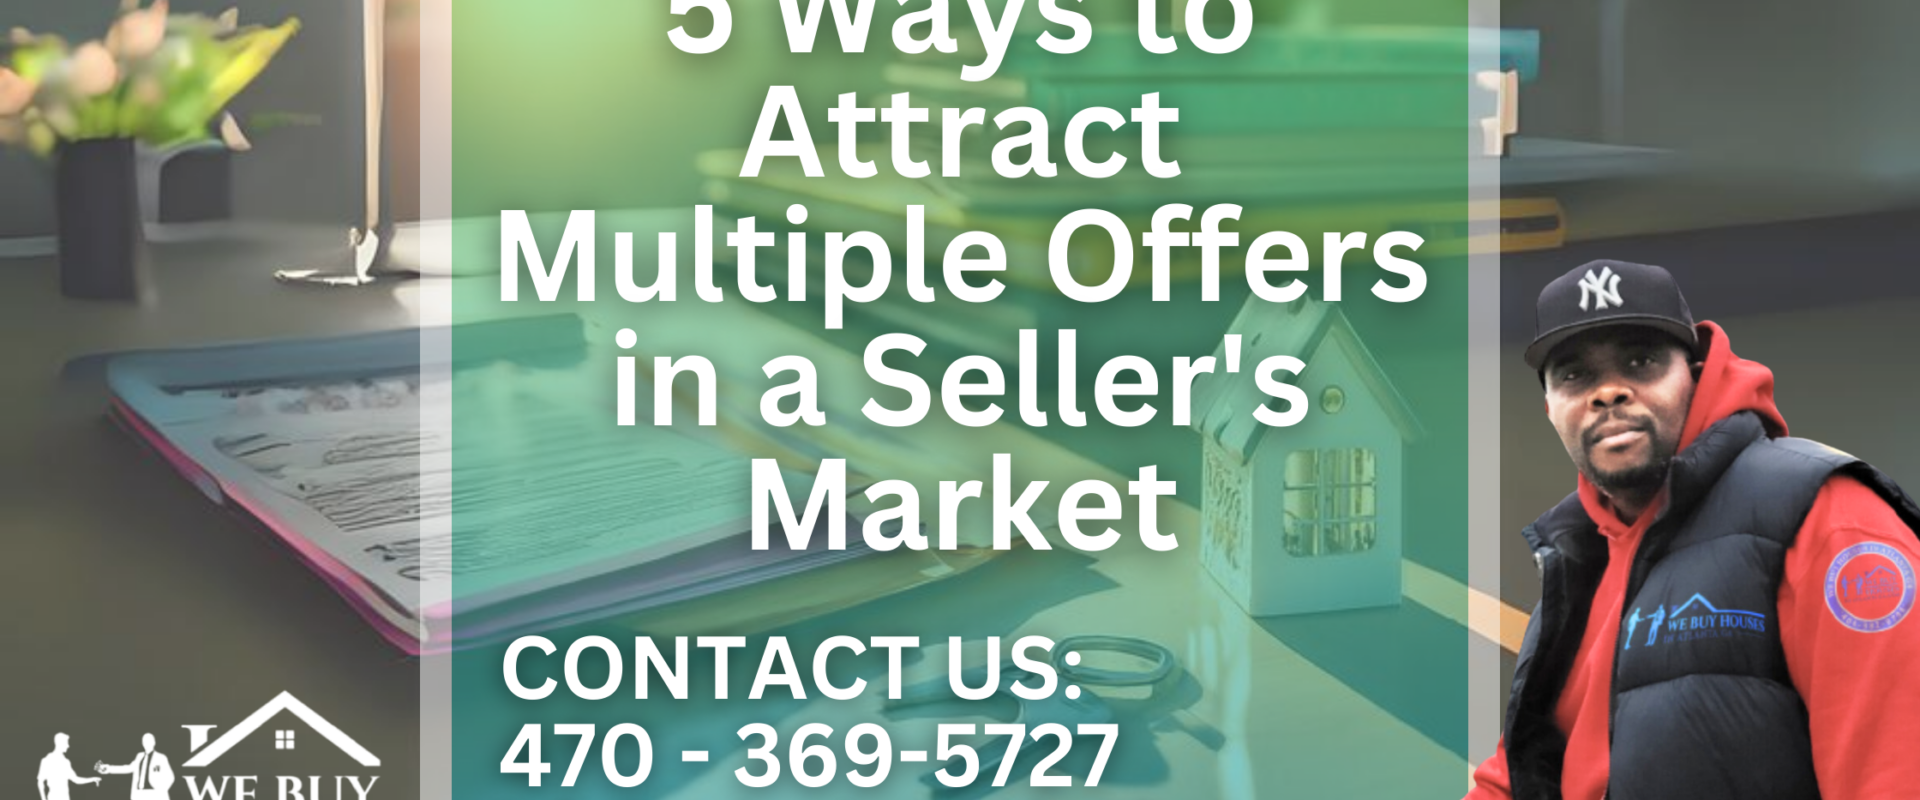 5 Ways to Attract Multiple Offers in a Seller's Market